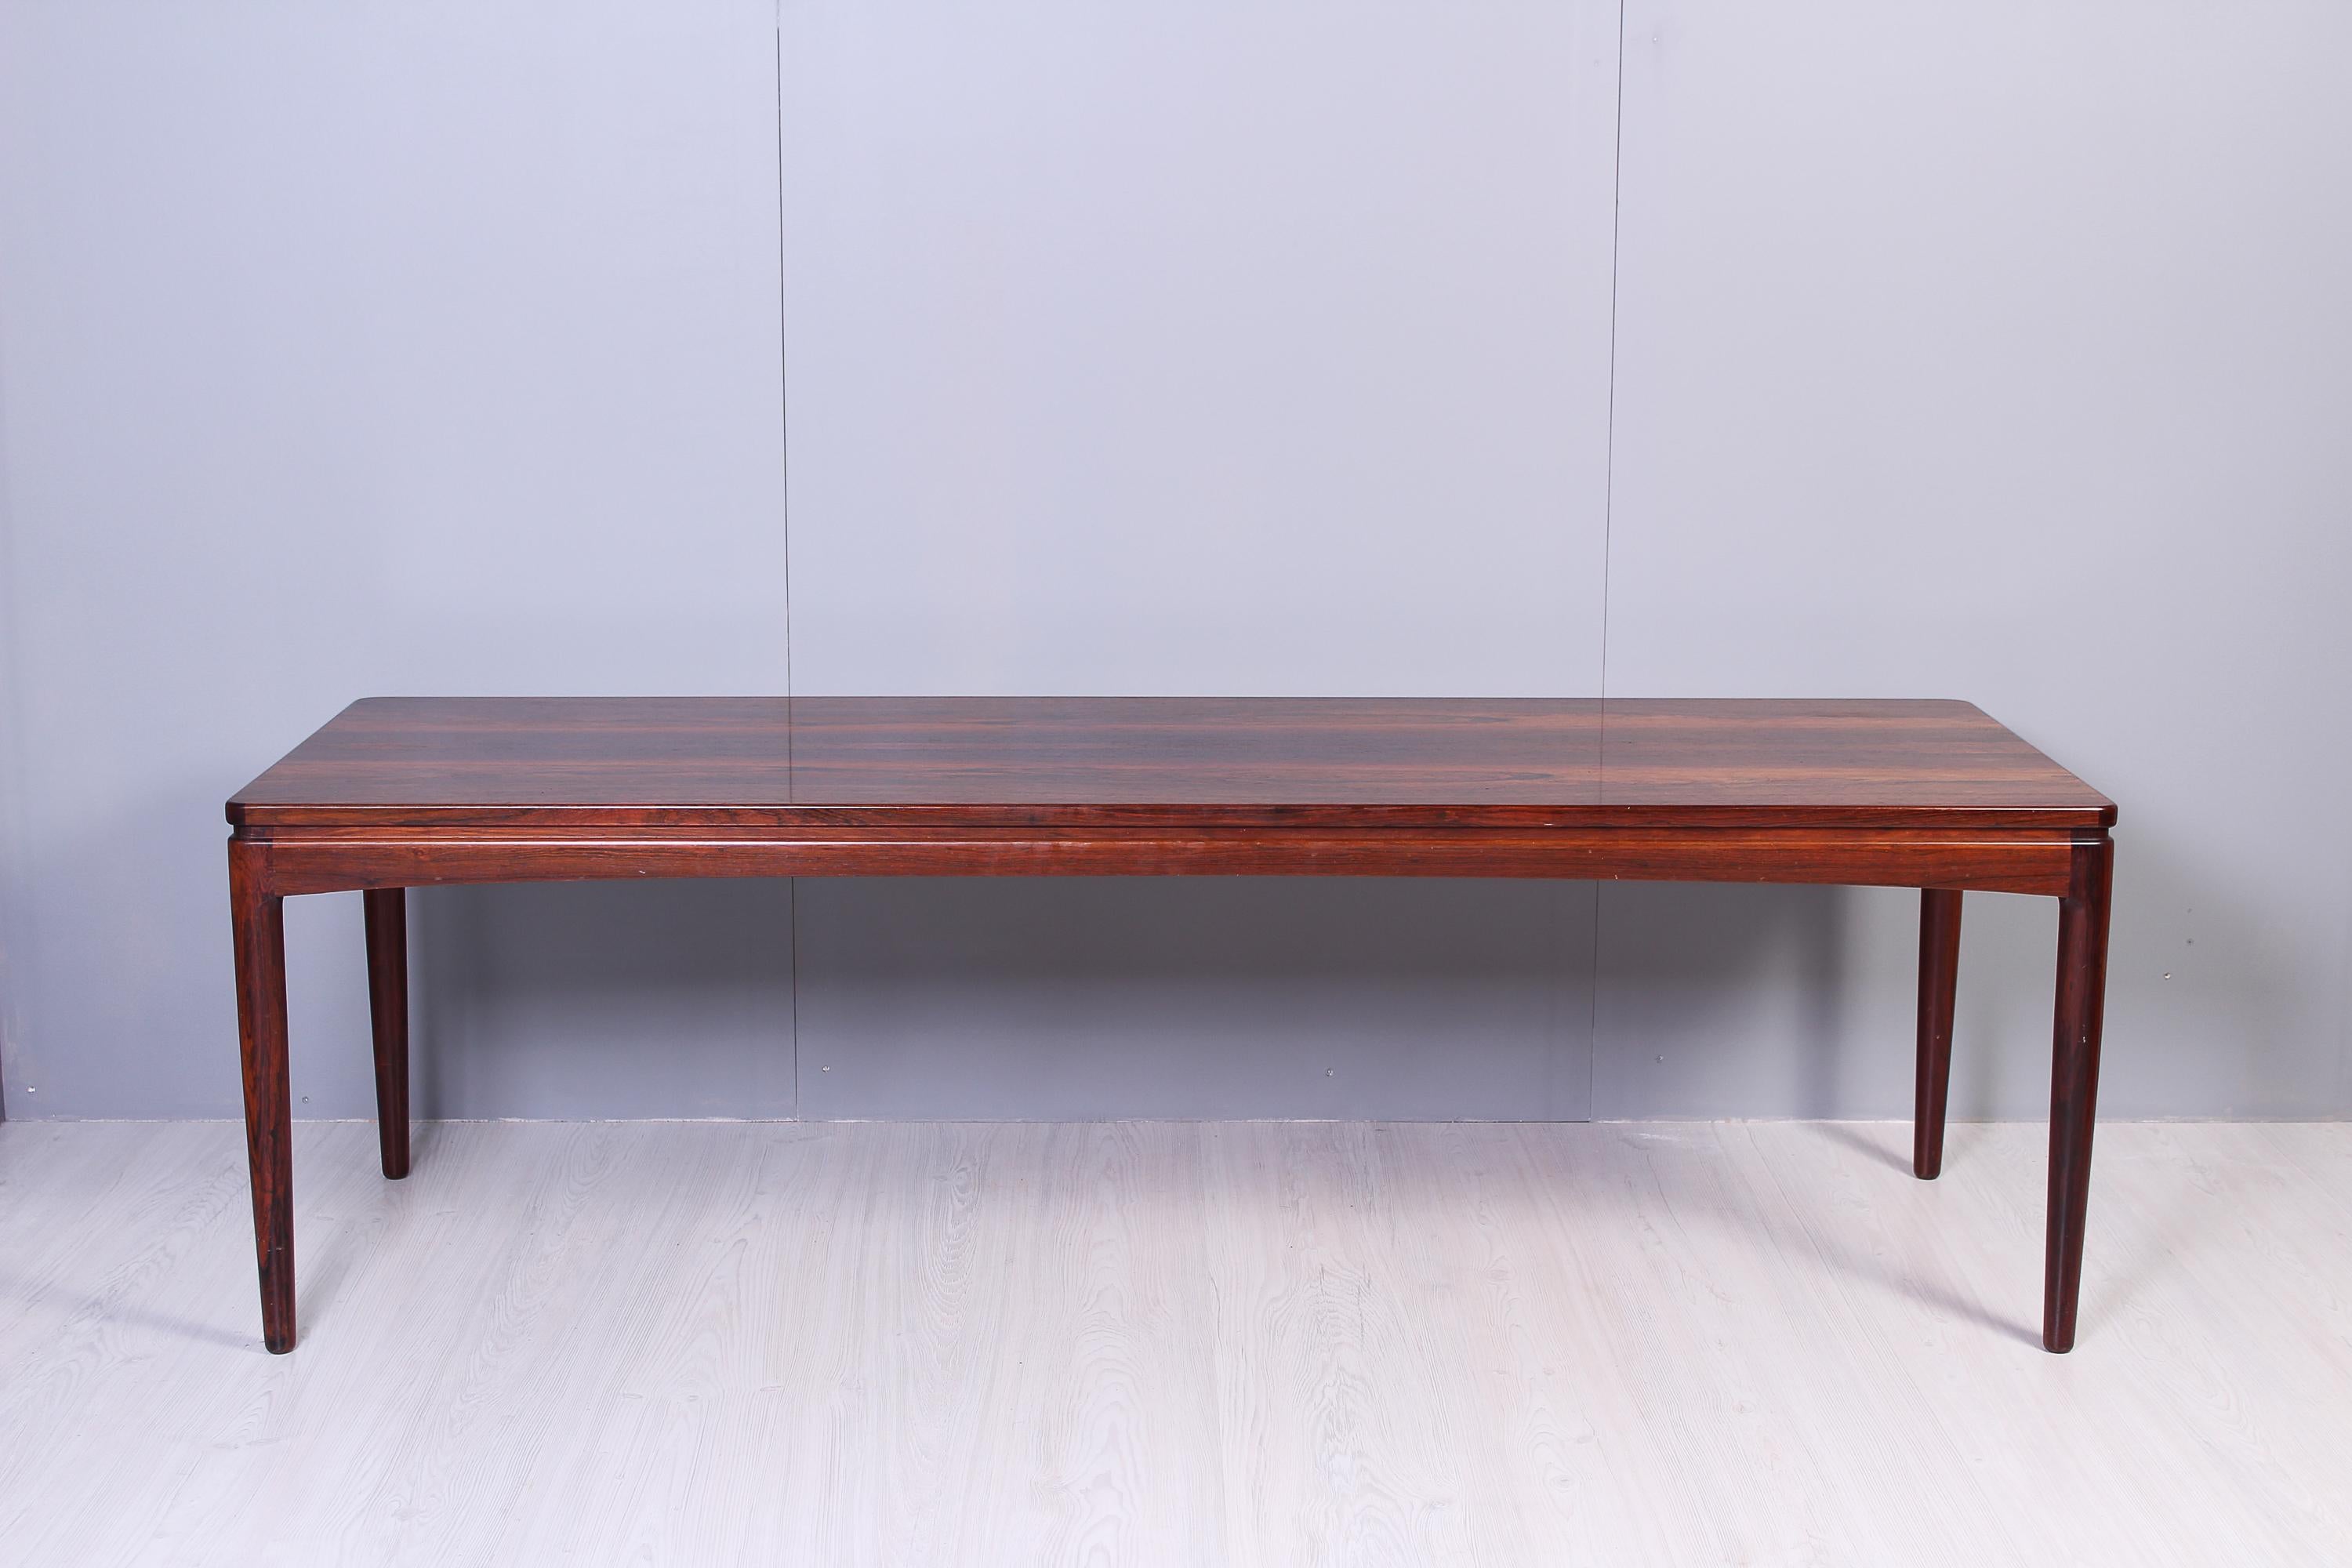 A long rosewood coffee table with in excellent vintage condition. The table has a pull out top on one of the sides that elegantly fits into the side without any handle. The table has sleek lines and nice details.